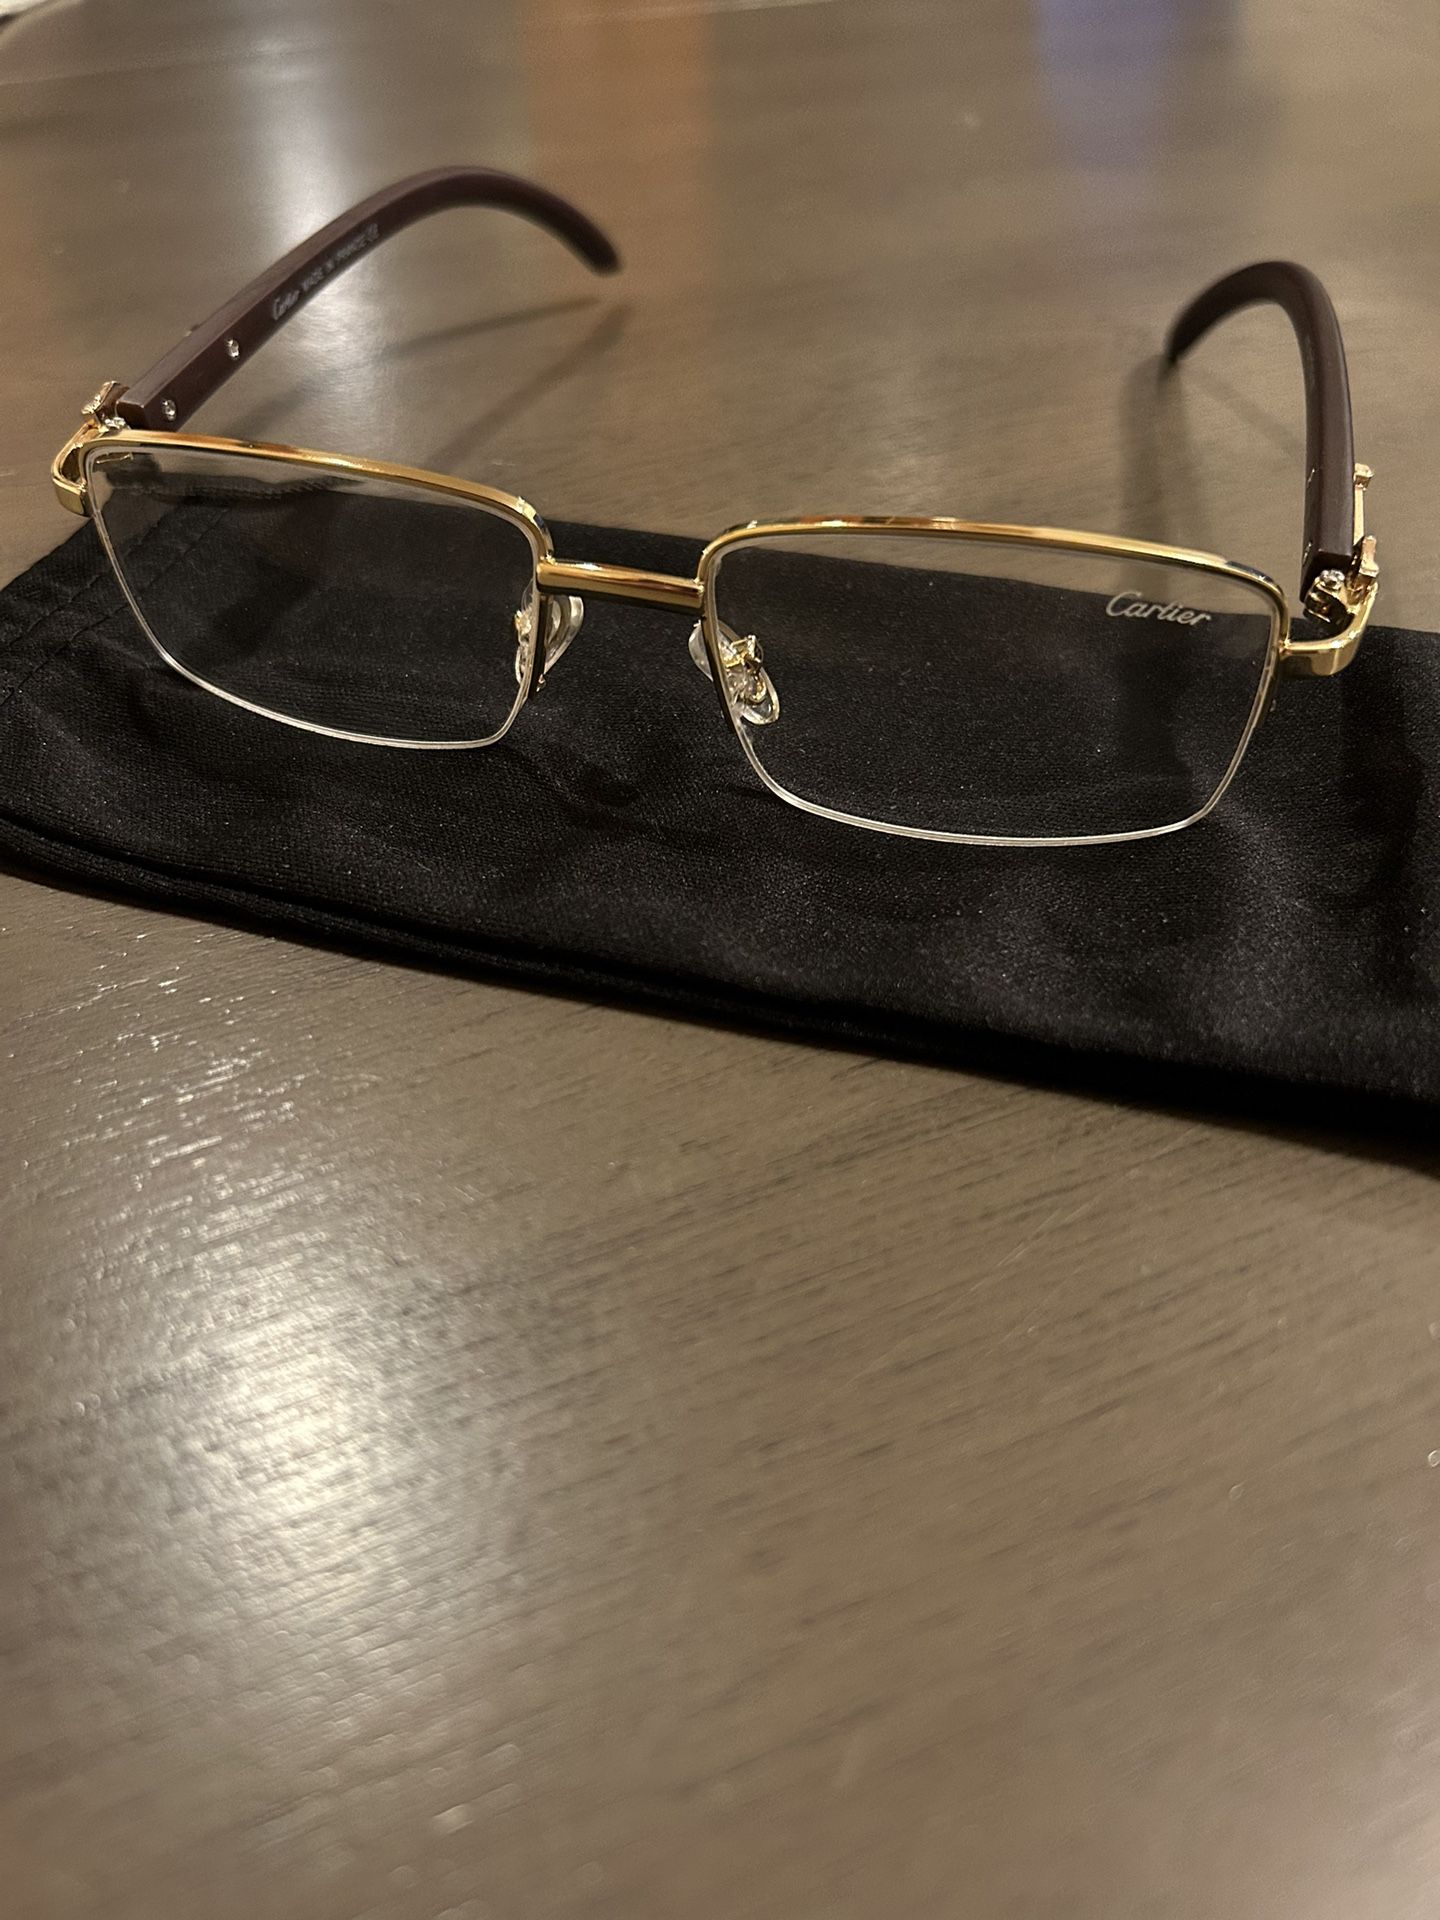 Cartier Buff Glasses for Sale in Huntington, NY - OfferUp